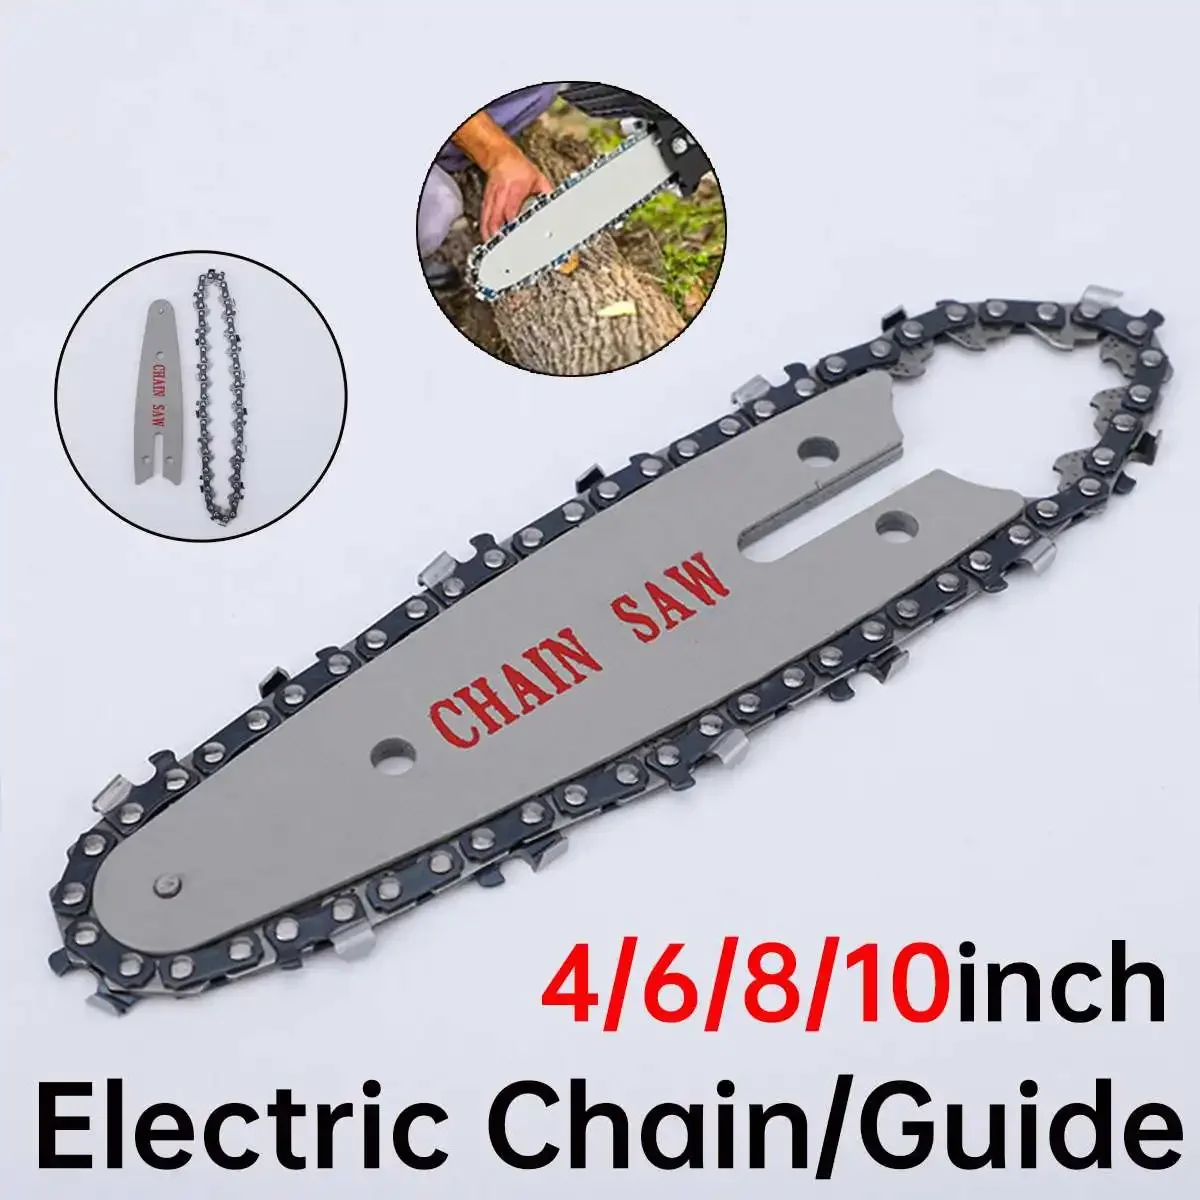 

4/6/8/10 inch Chain Guide Electric Chainsaw Tools Guide Chains Used For Logging Pruning Saw Electric Saw Chain Accessories